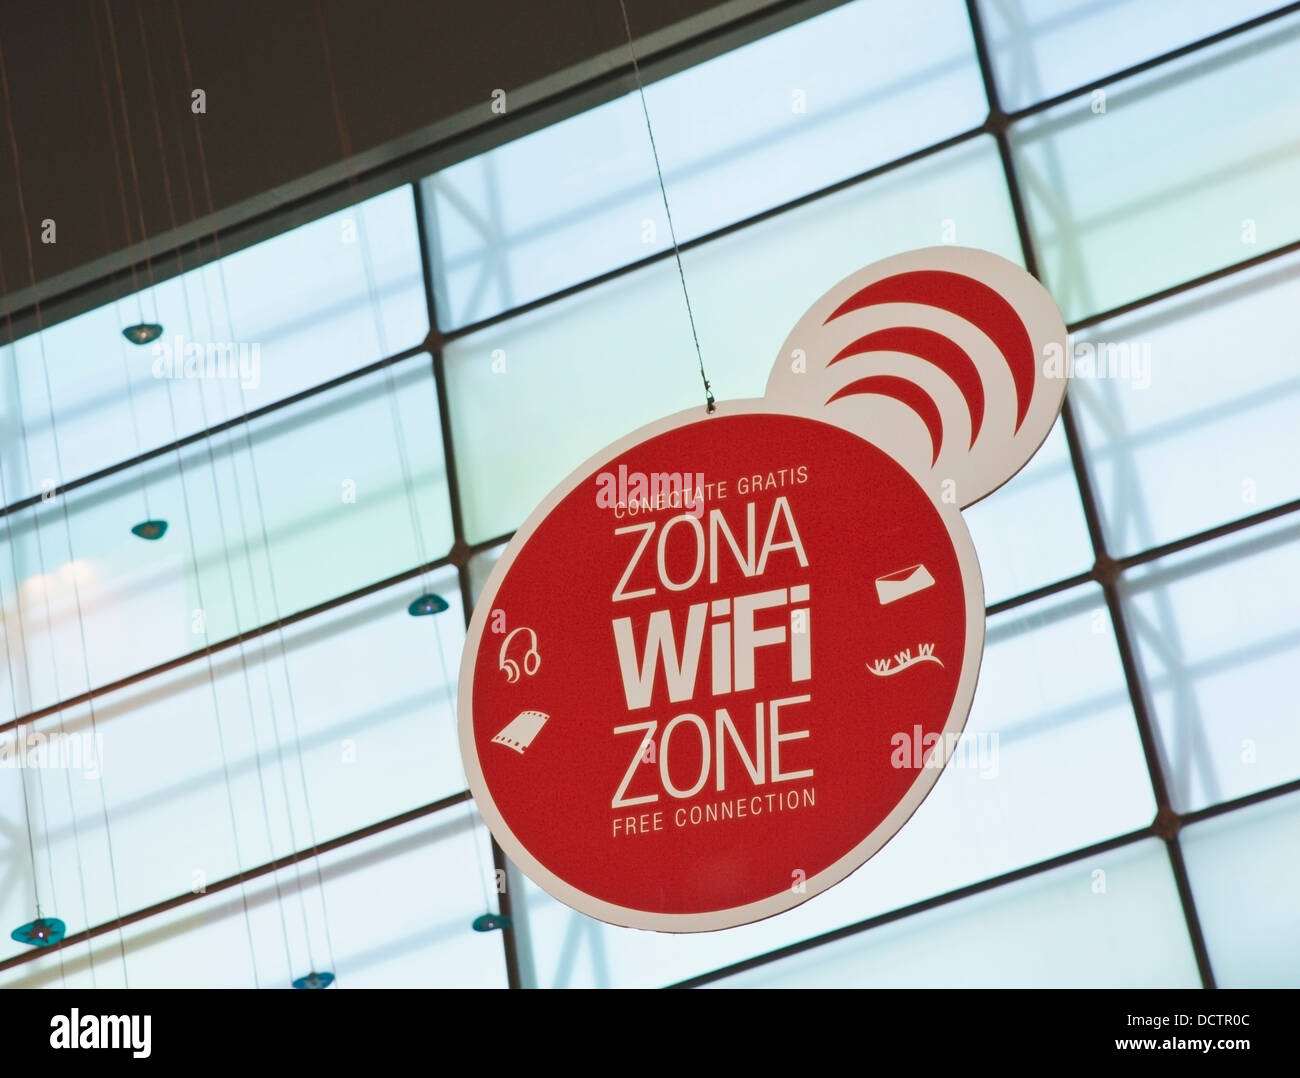 Wifi Zone Advertised In Both Spanish And English Stock Photo